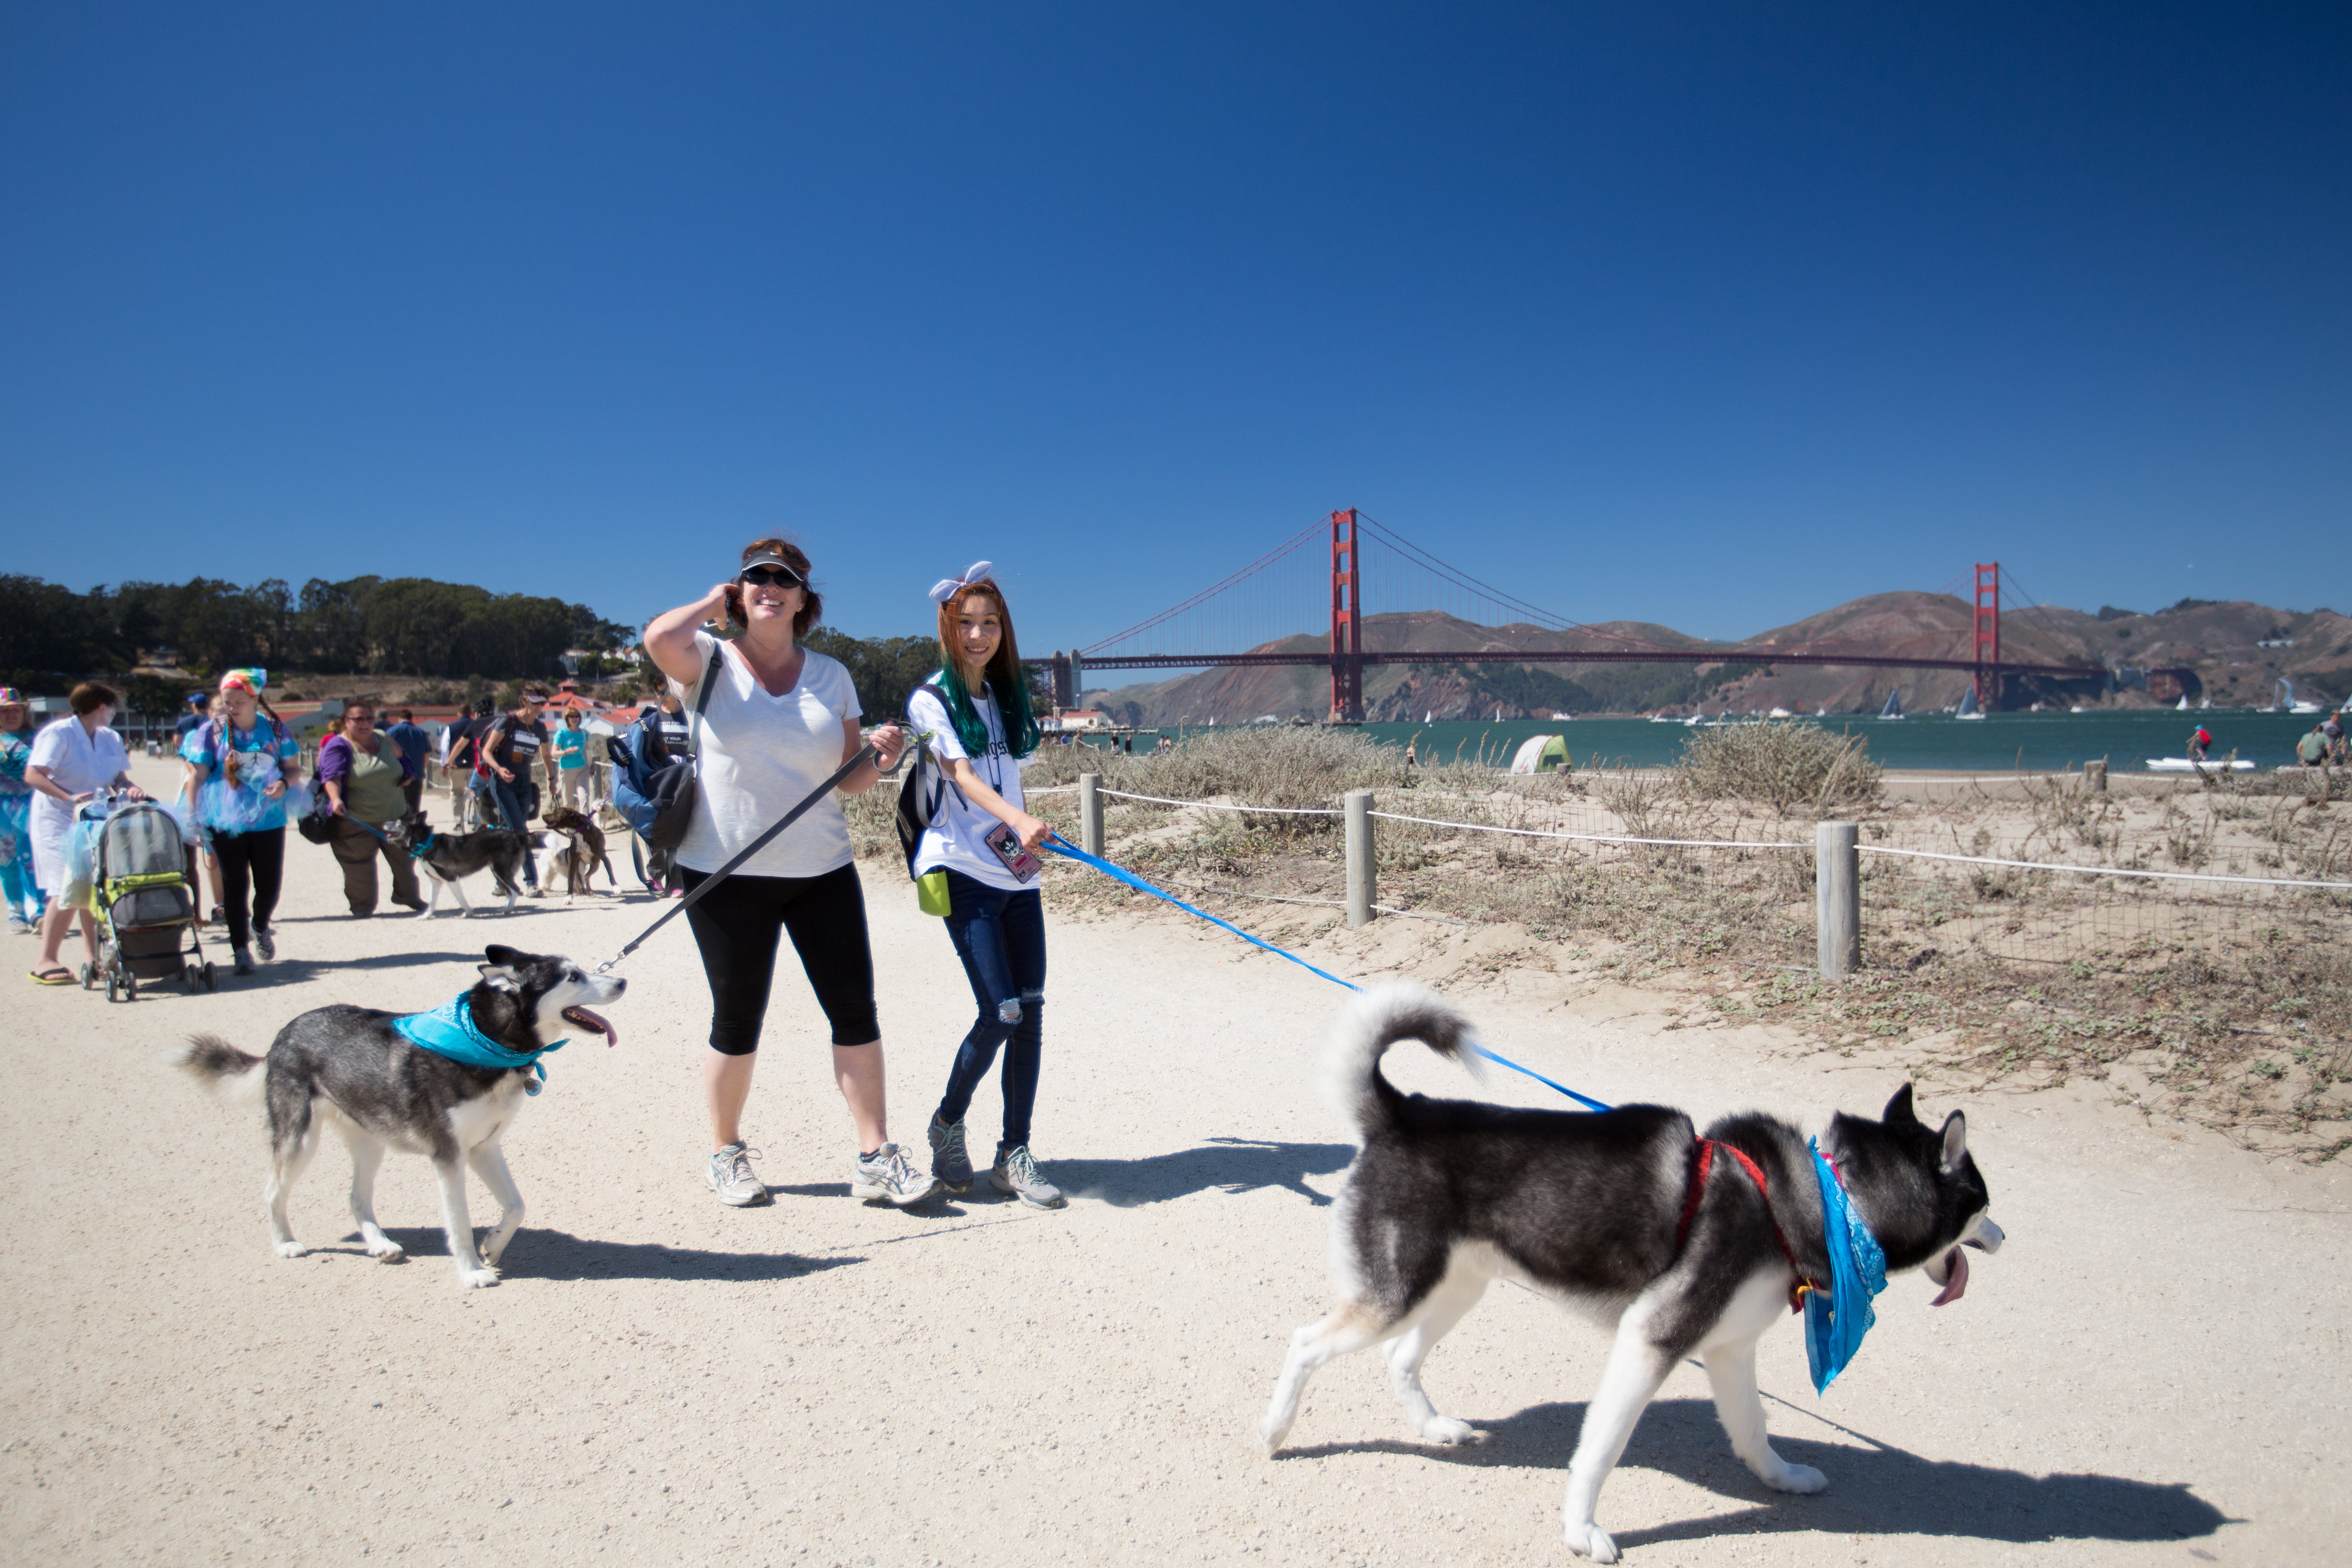 In 2016, over $2.6 million was raised by more than 15,500 participants for homeless pets in San Fransisco and other communities across the country.